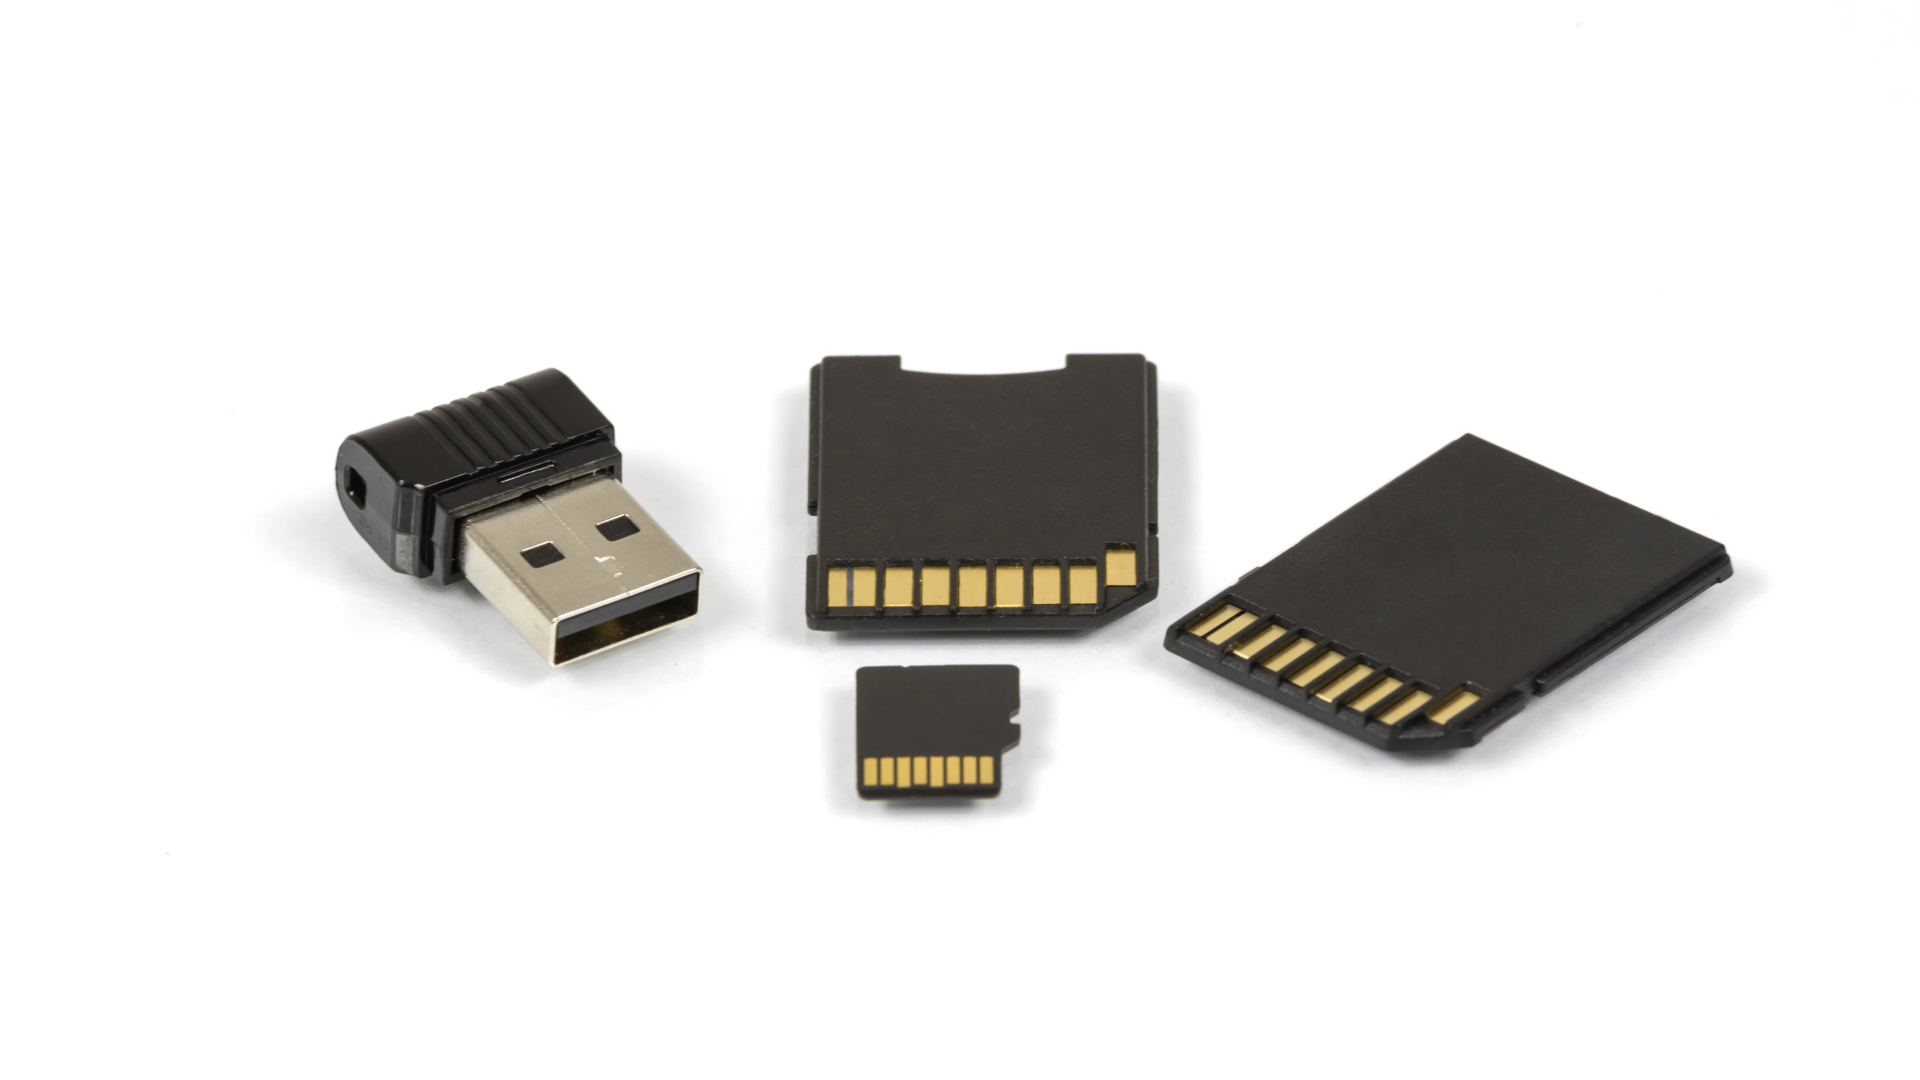 Different ways to store data: SD-cards, USB